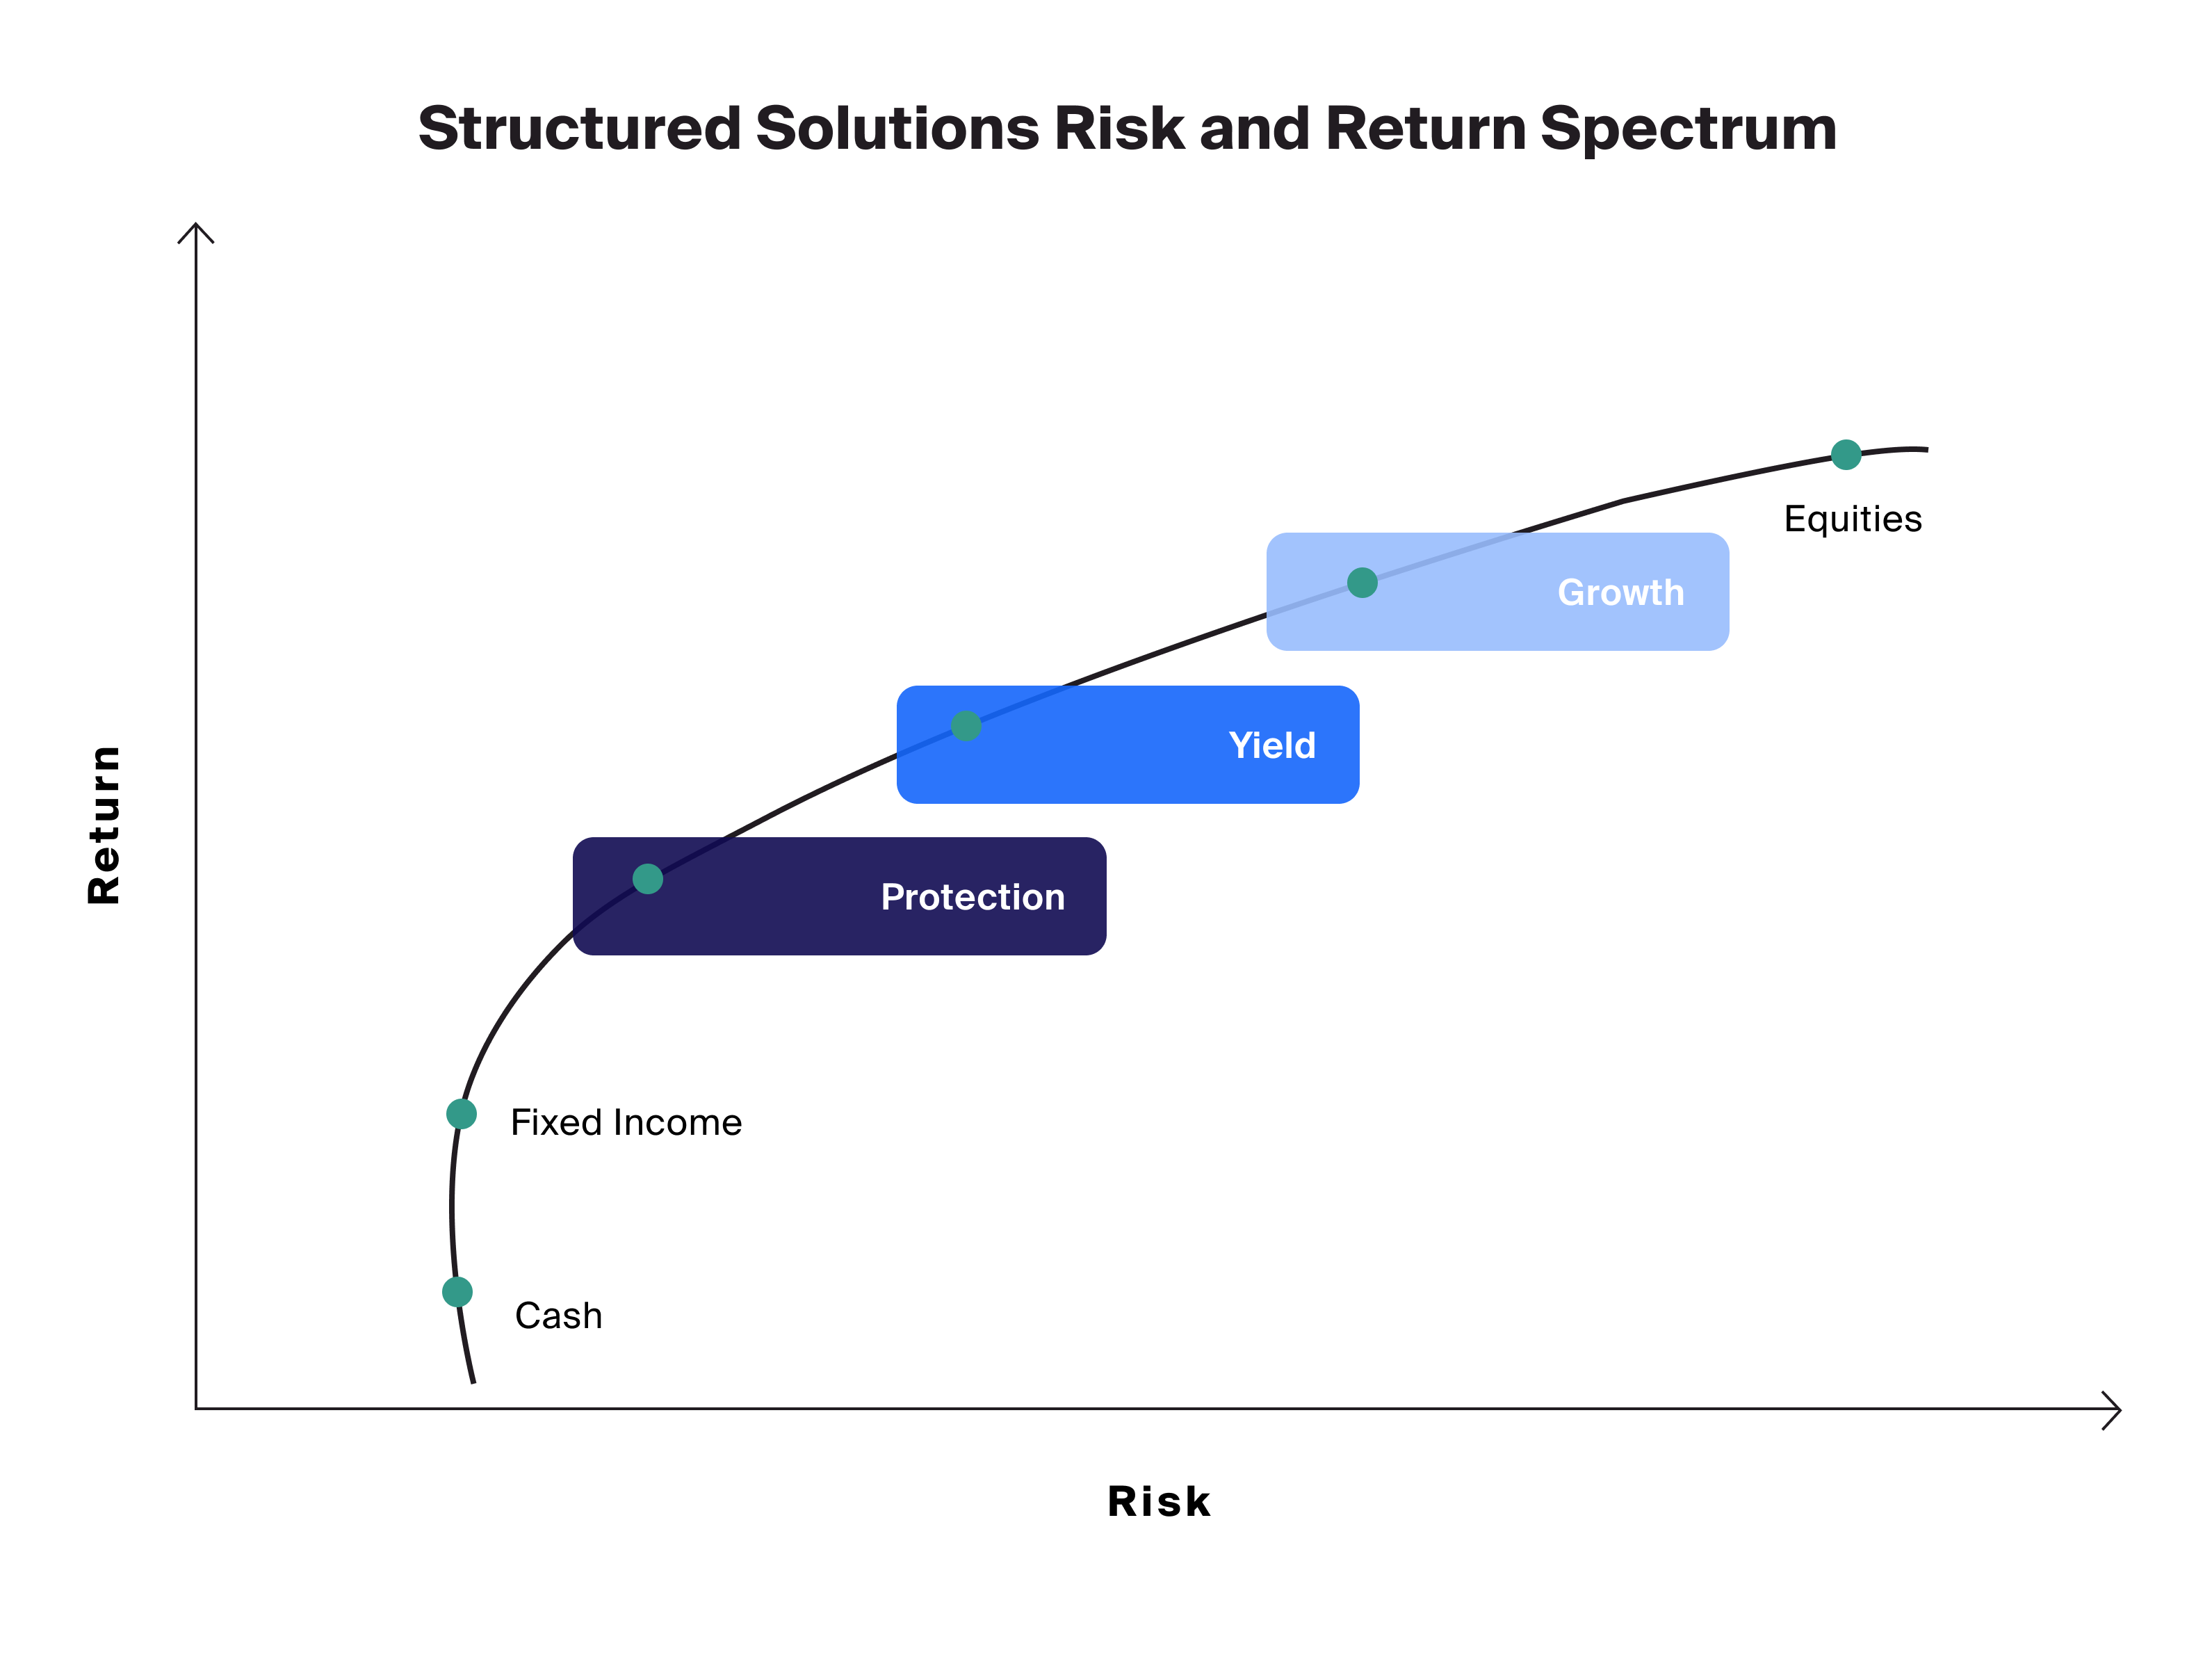 Exhibit 2: Three broad categories of structured solutions tend to offer a range of risk-return profiles between equities and bonds